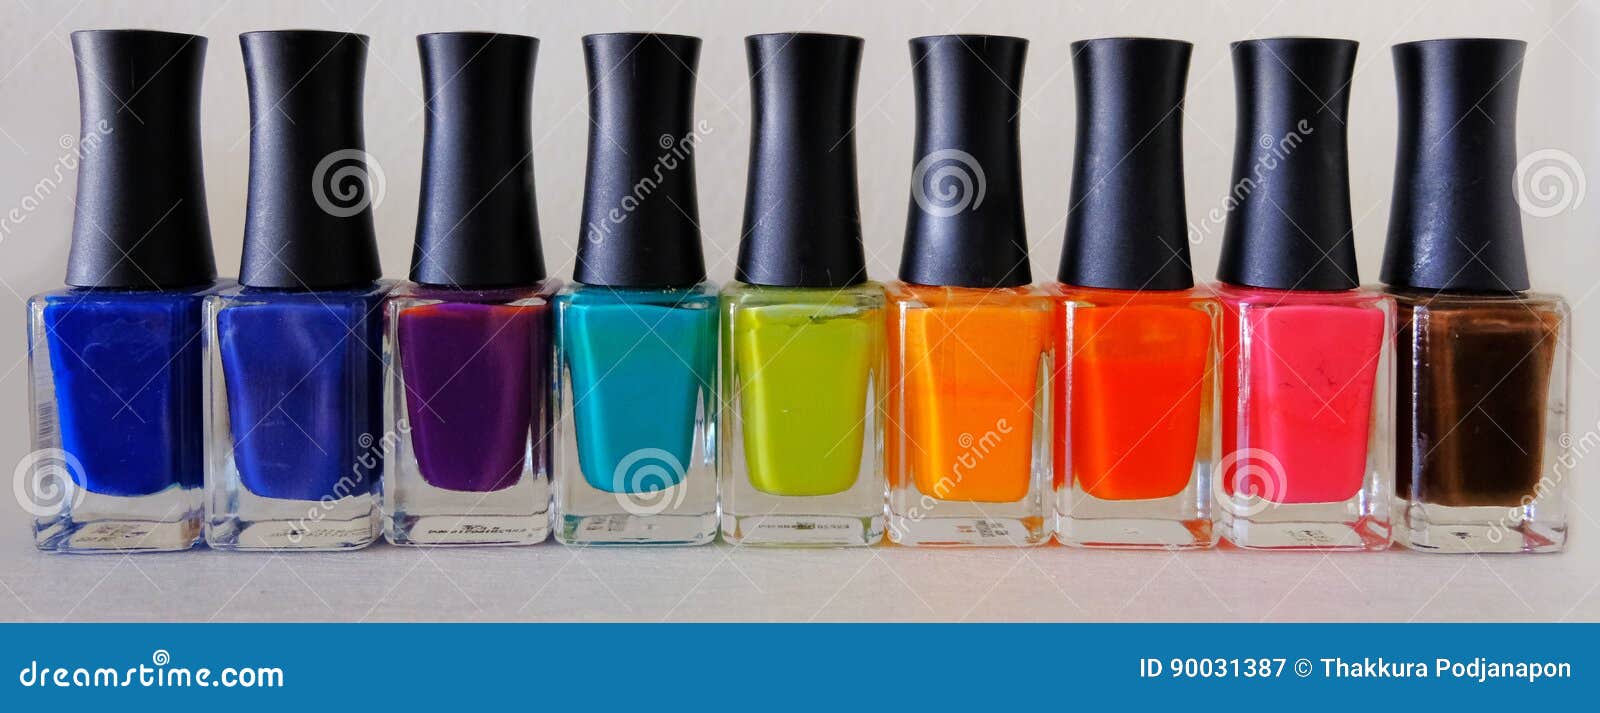 Colorful Nail Polish Collection - wide 5